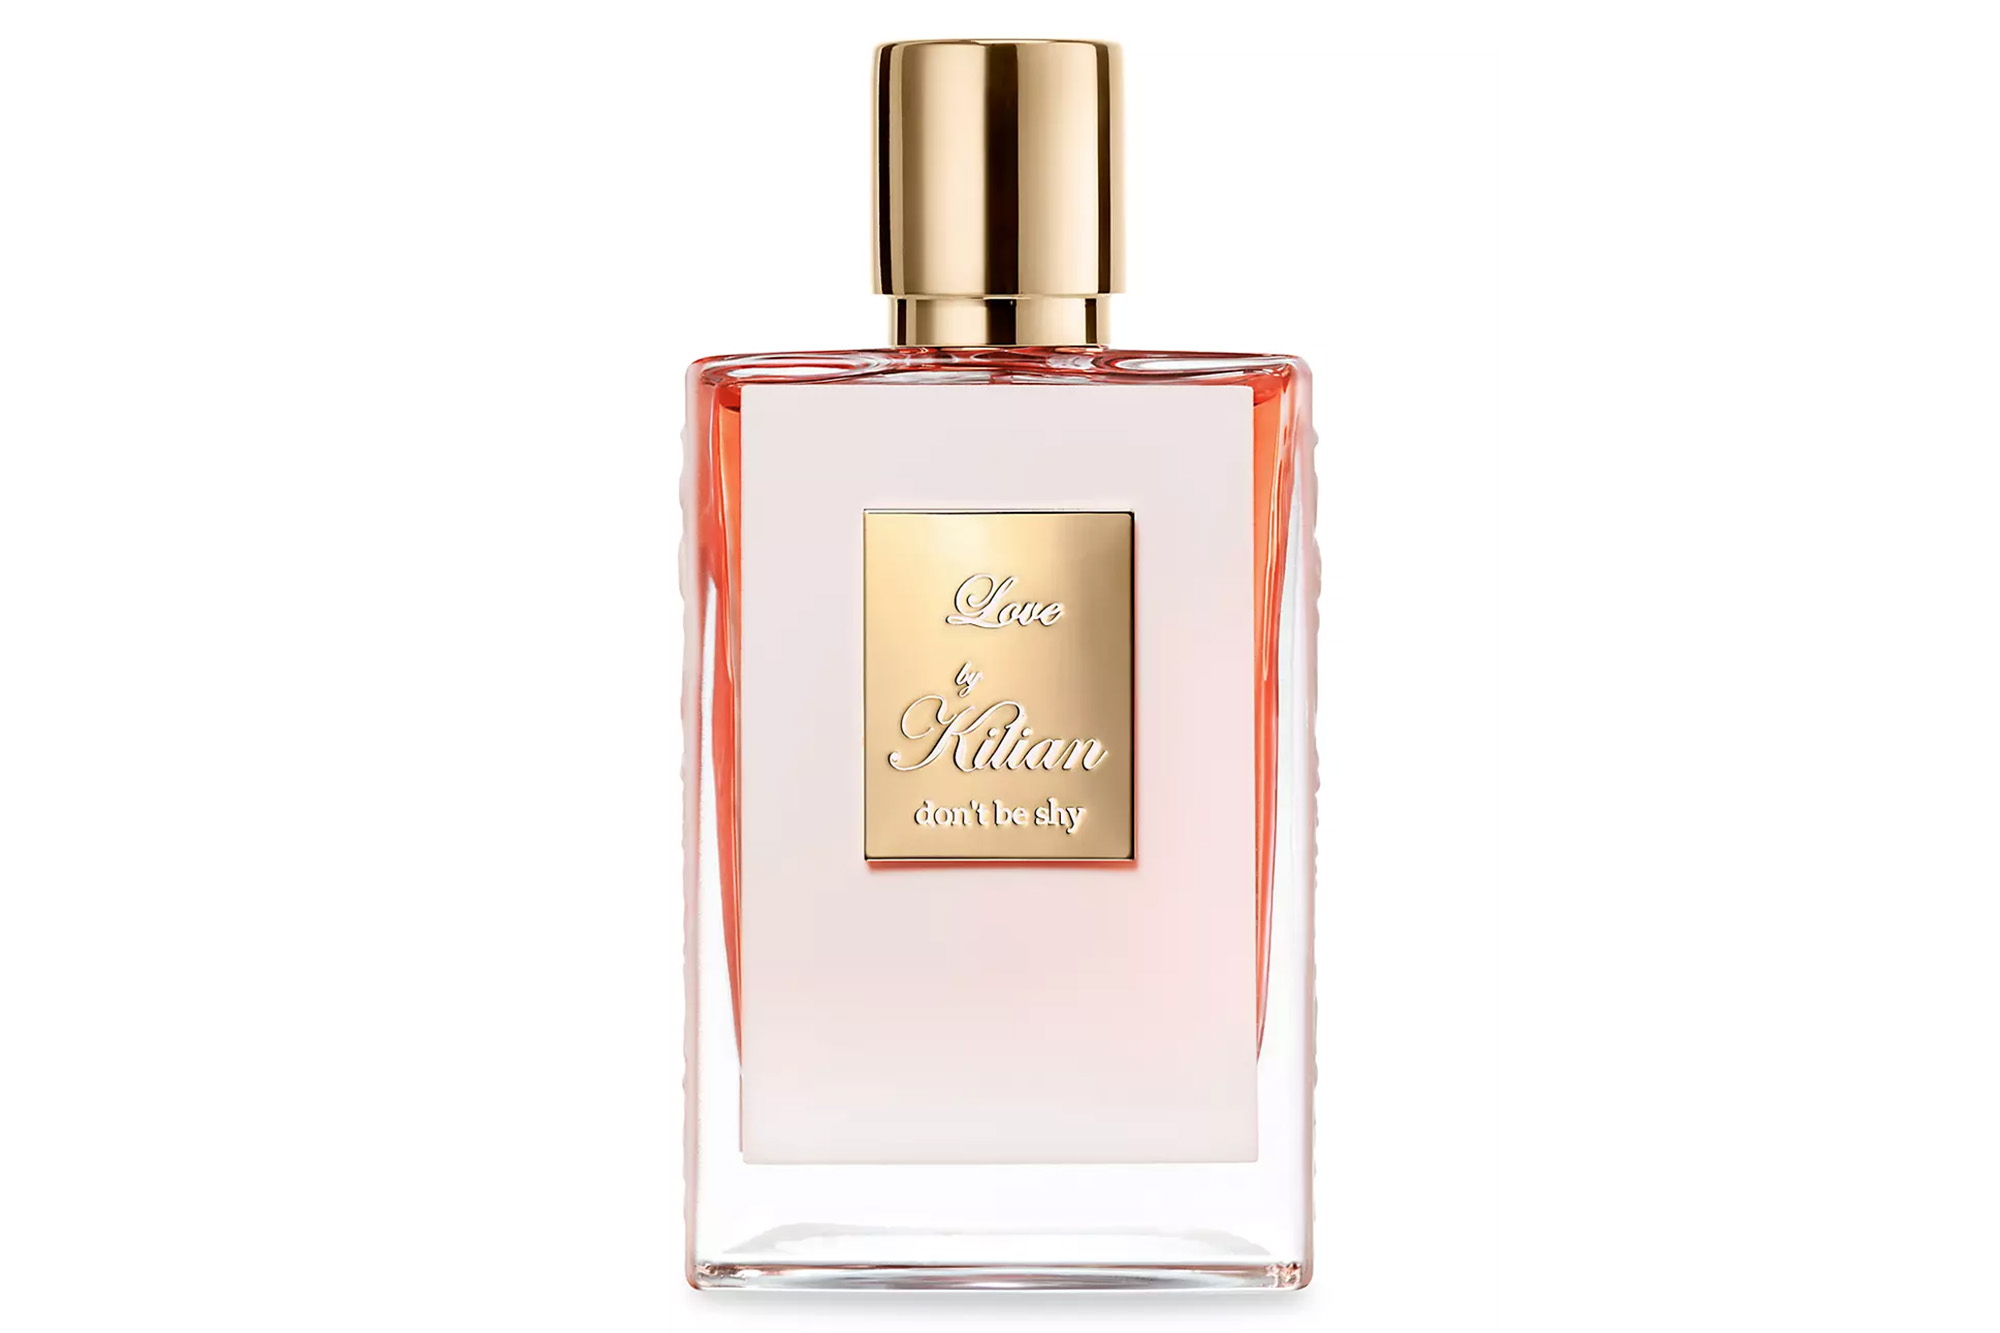 A pink perfume bottle